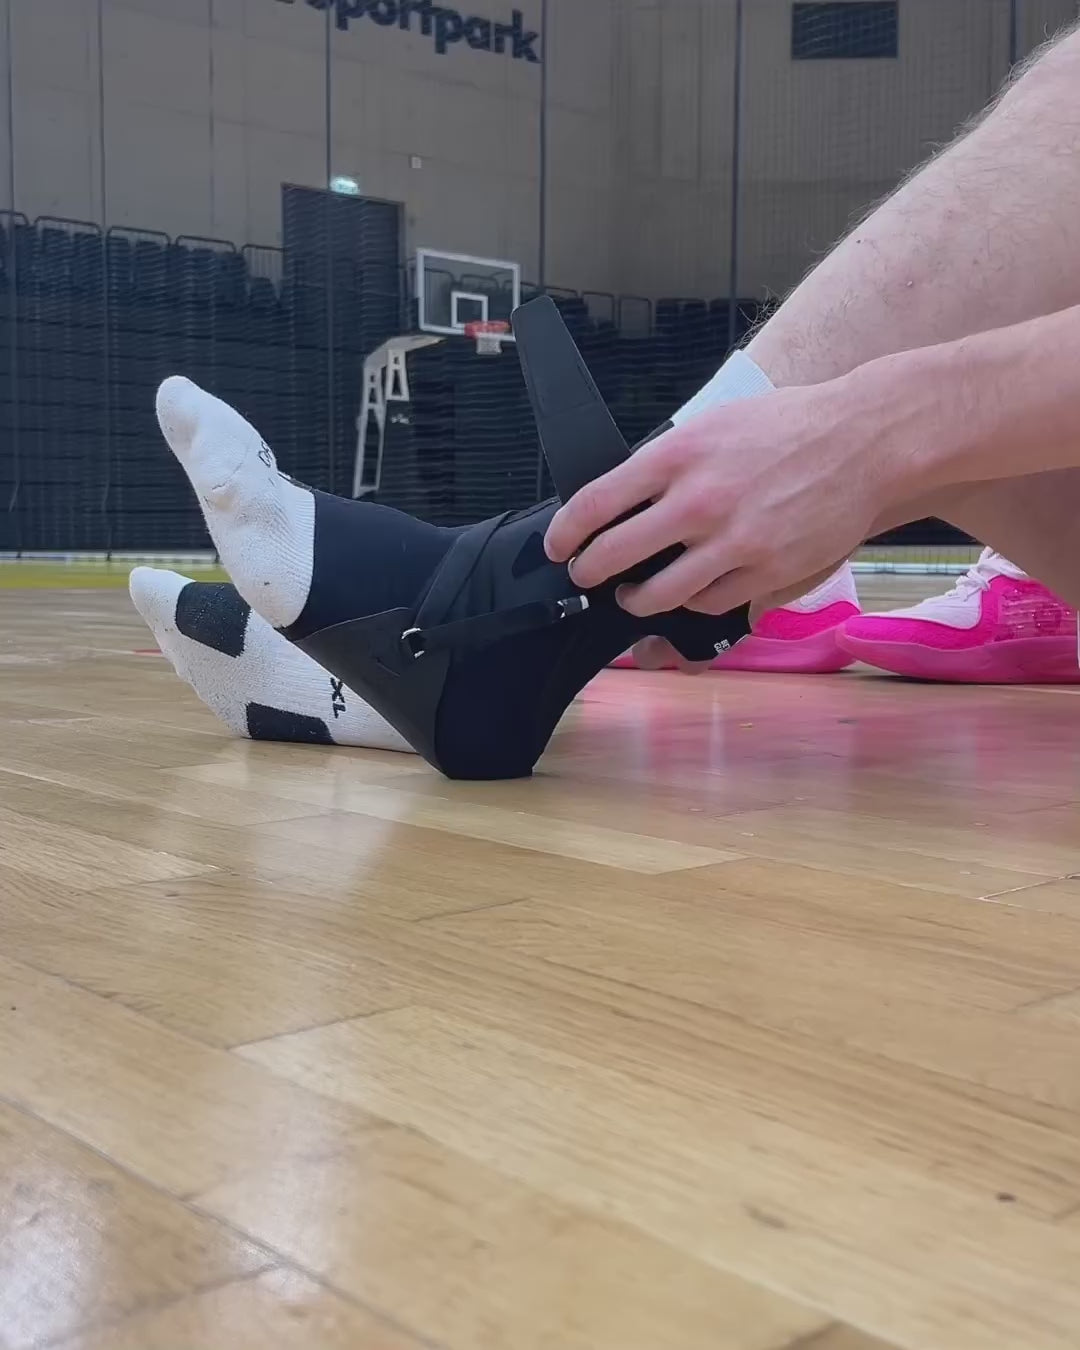 The best ankle brace for basketball